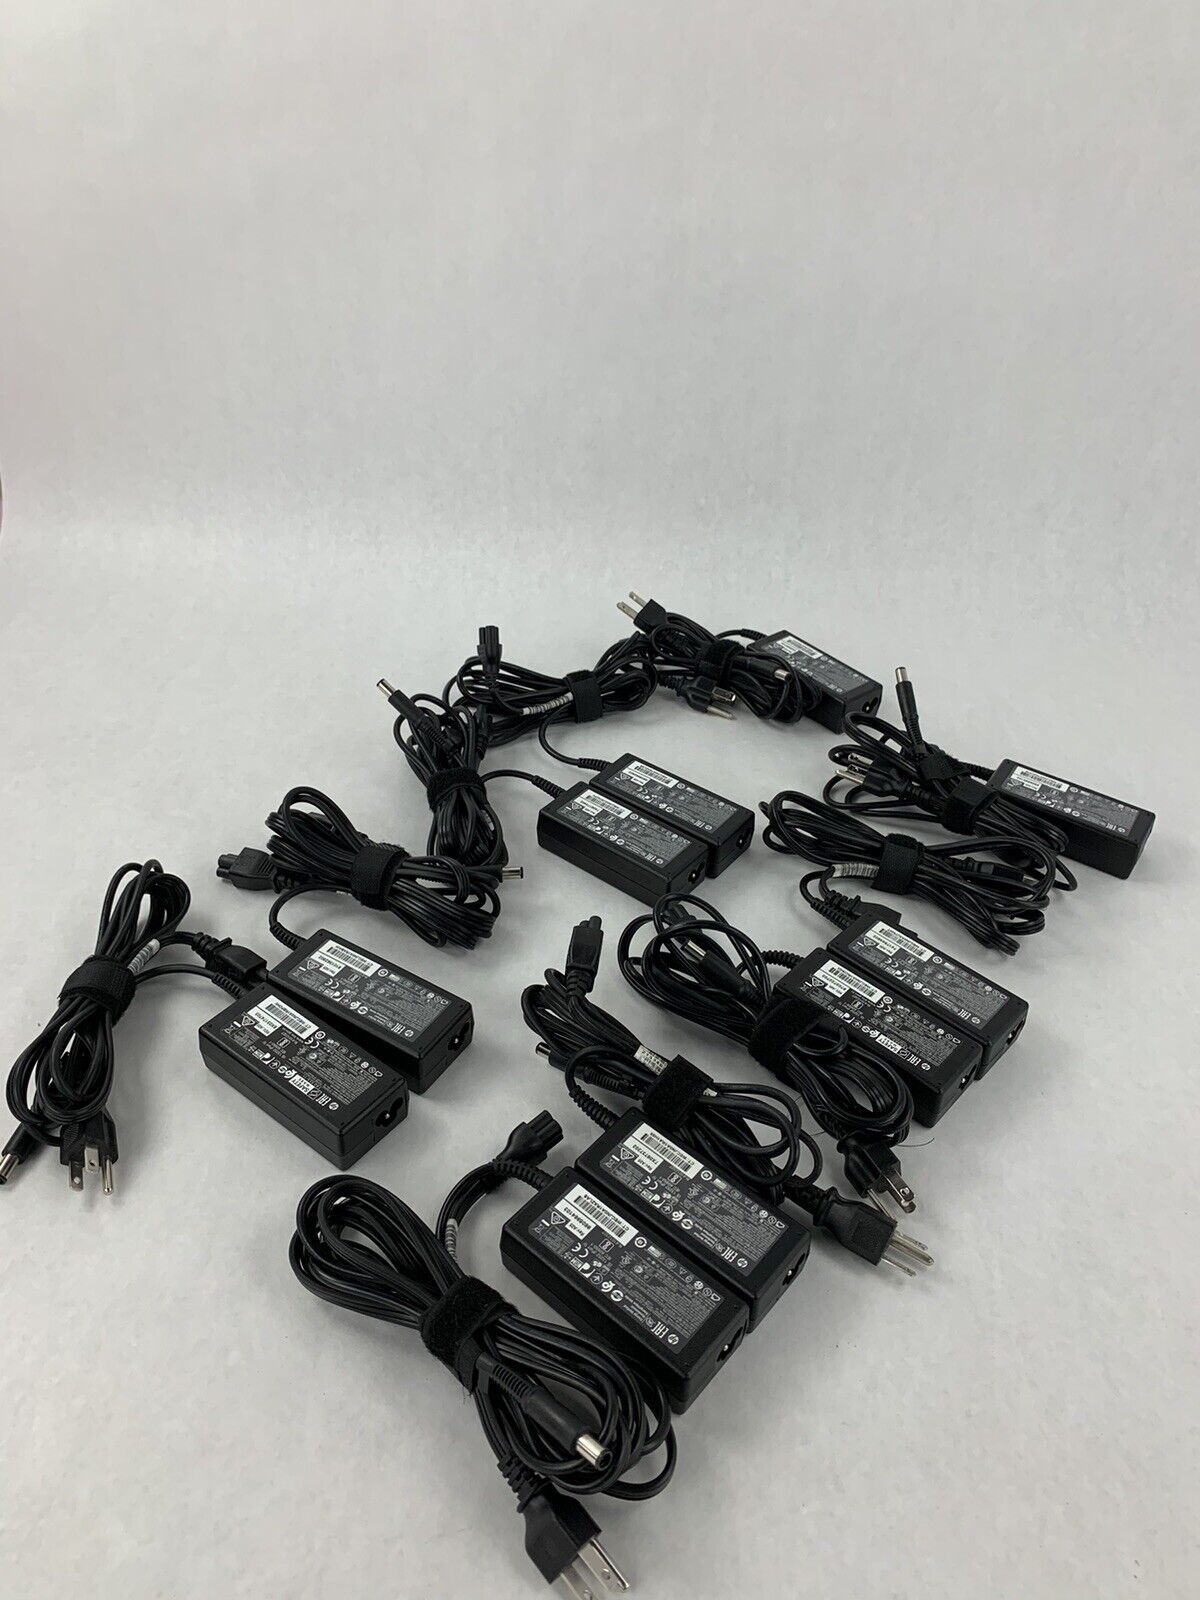 10x Lot Genuine HP PPP019L-S 19.5V 3.33A 65W AC Power Adapter 756413-001